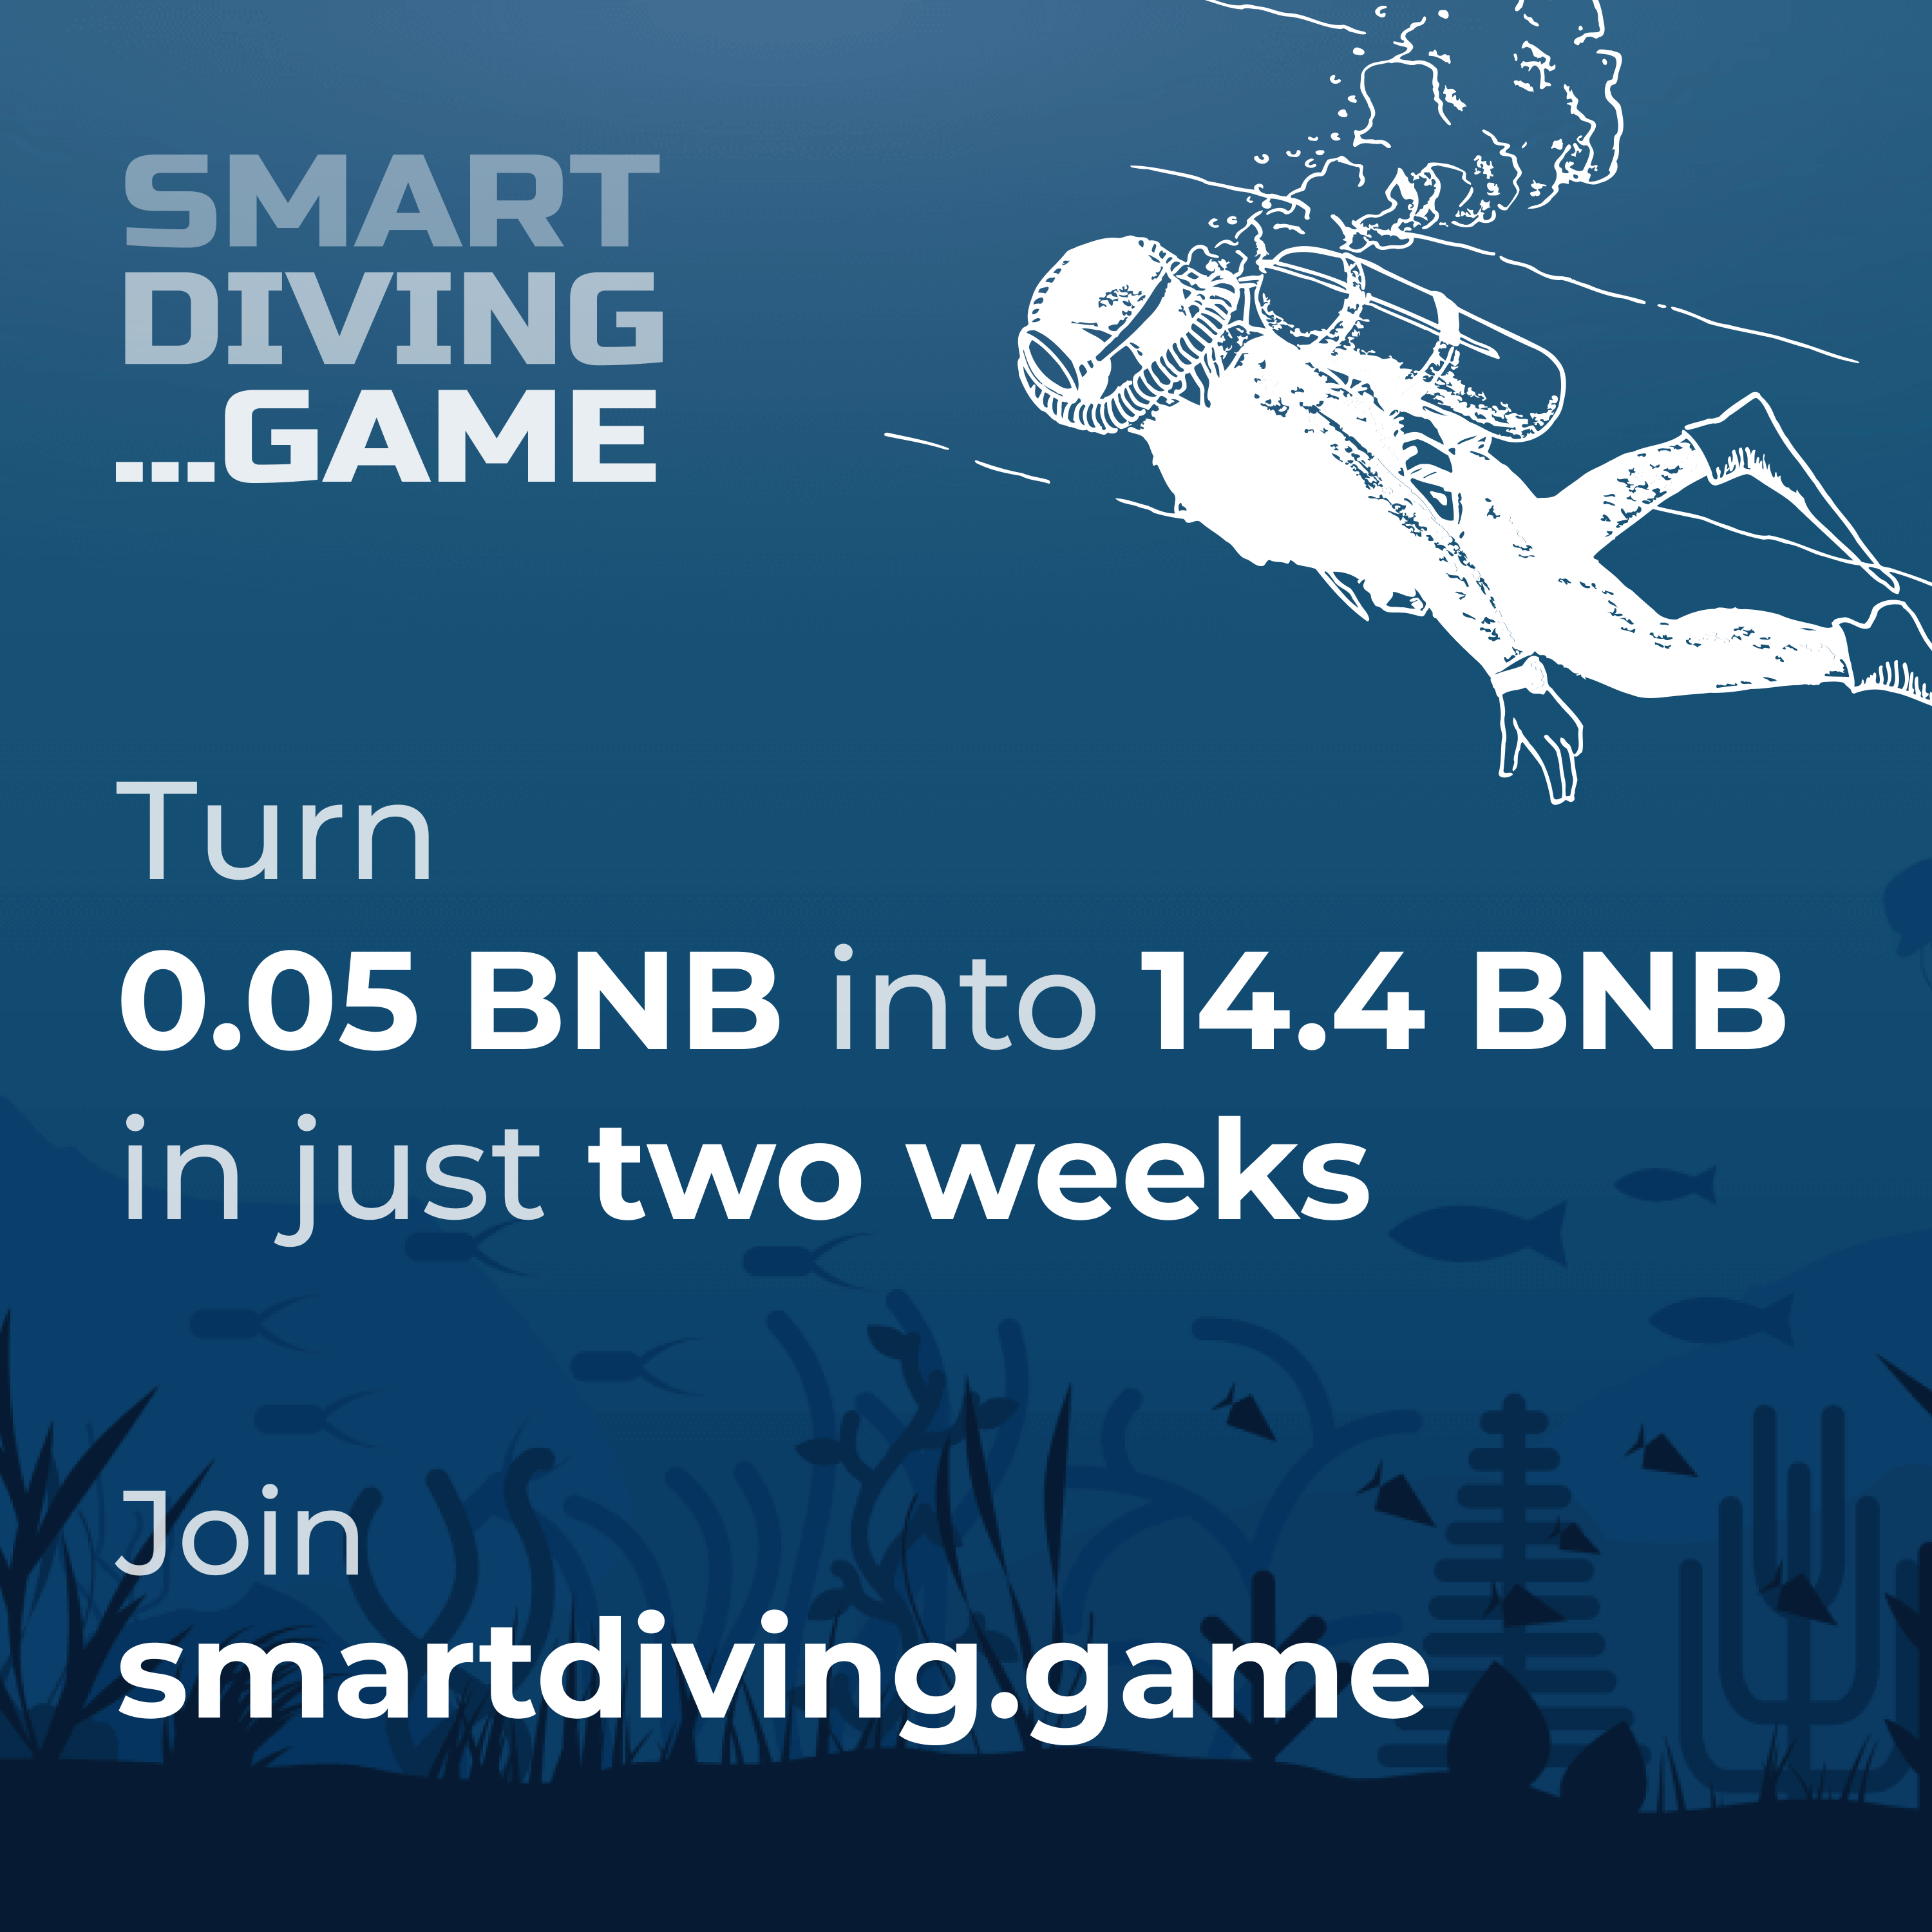 Nft smartdiving.game